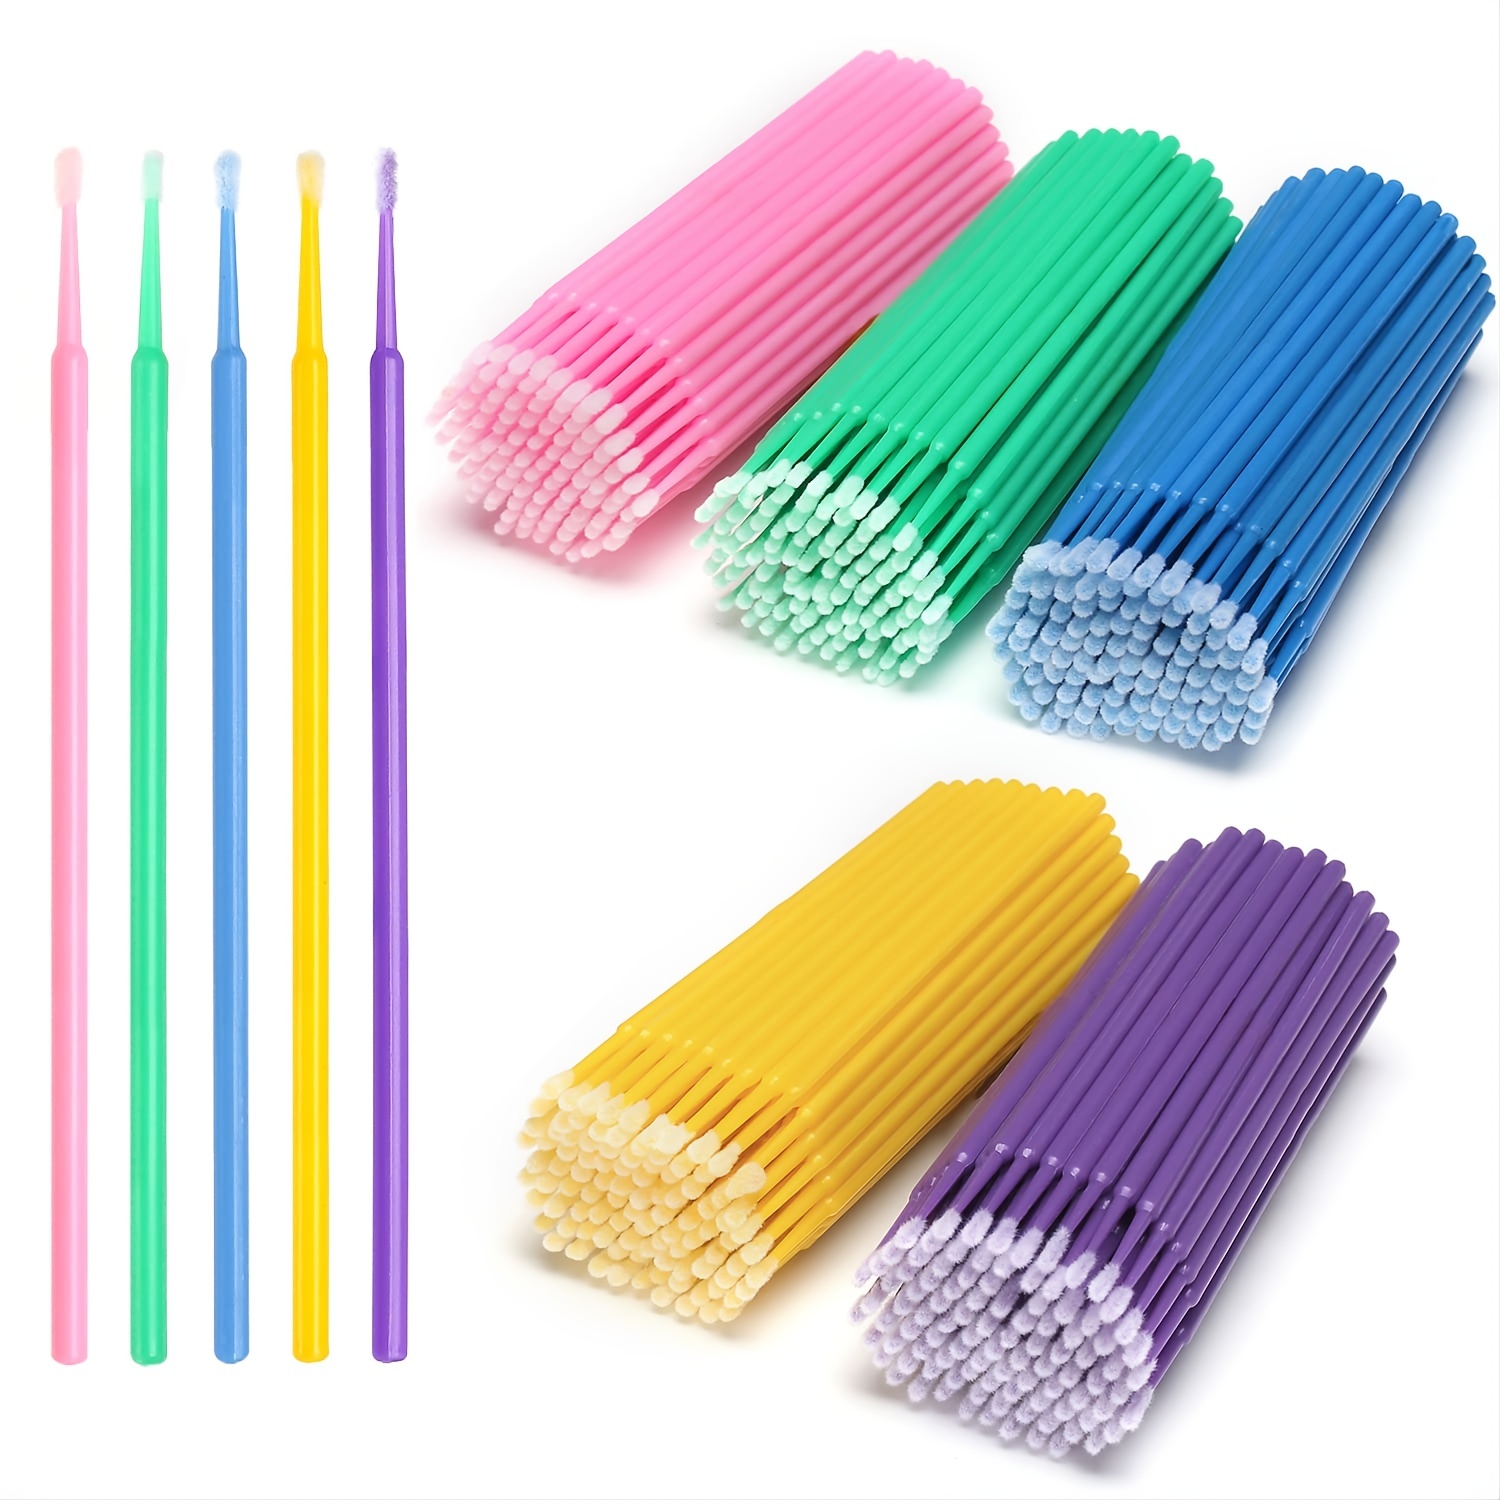 Micro-Brushes (100 Pack)